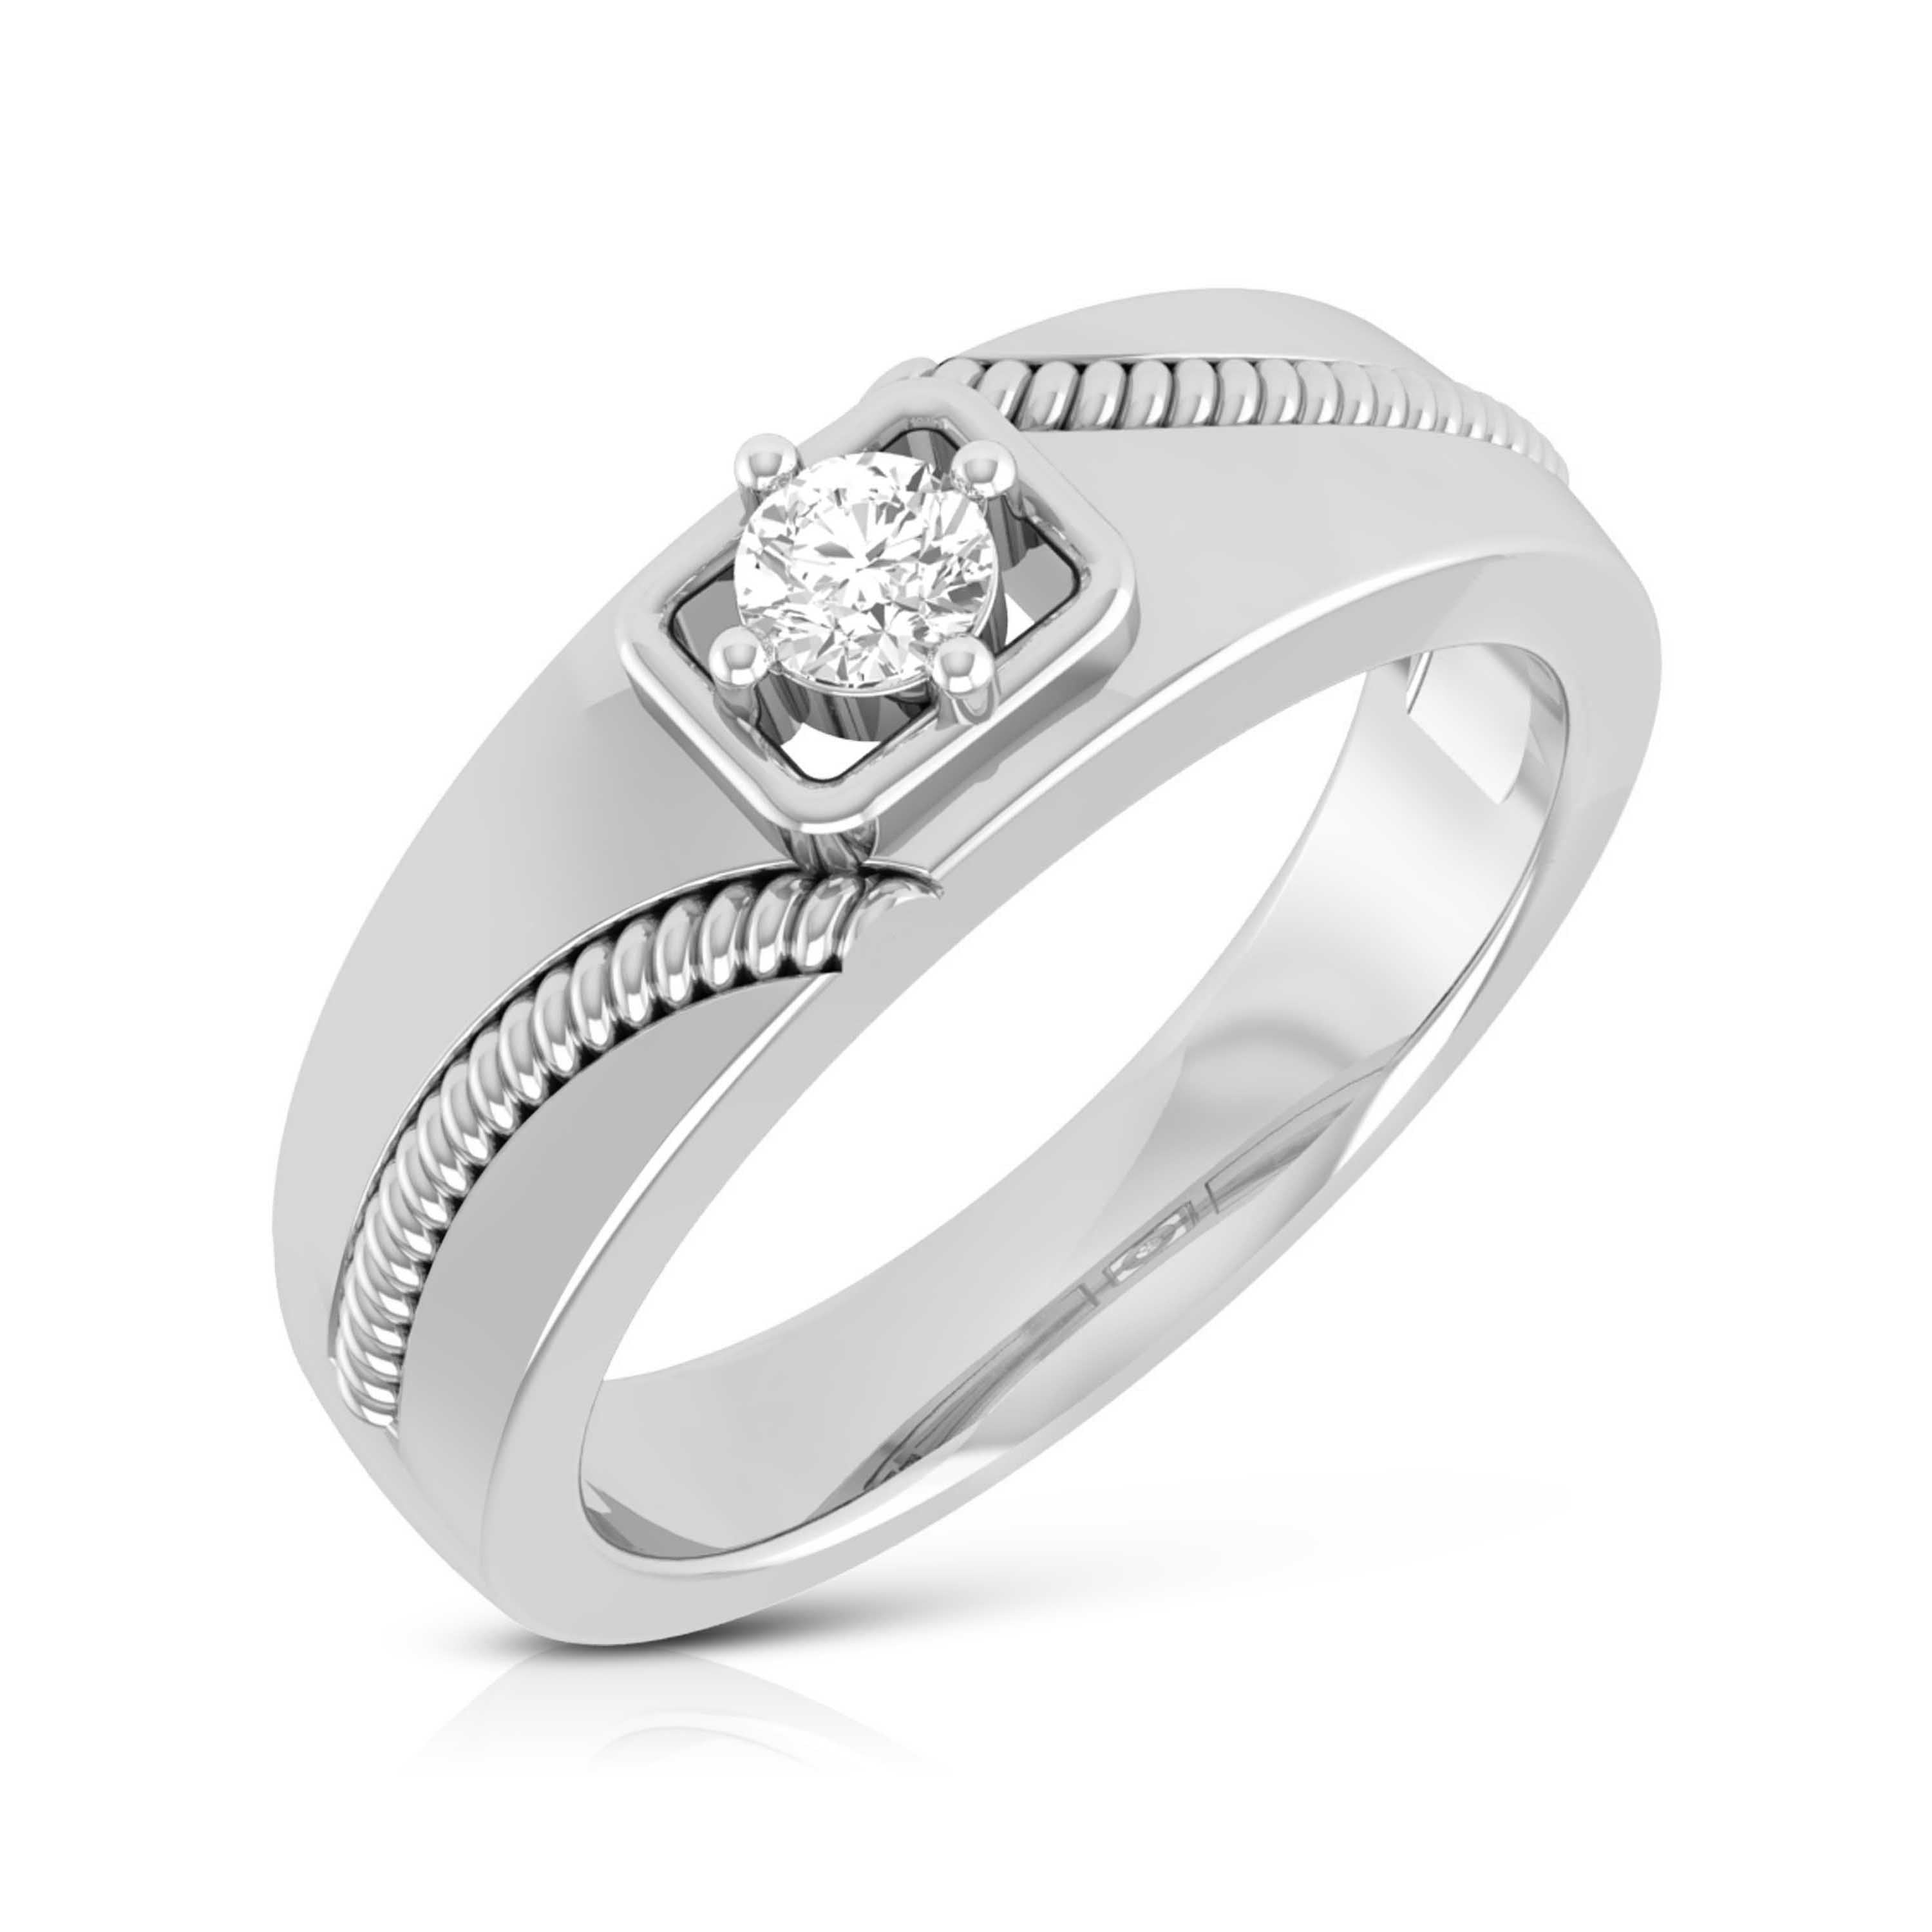 I-PRIMO Hong Kong, Diamond Engagement Ring, Wedding Ring Specialy Brand